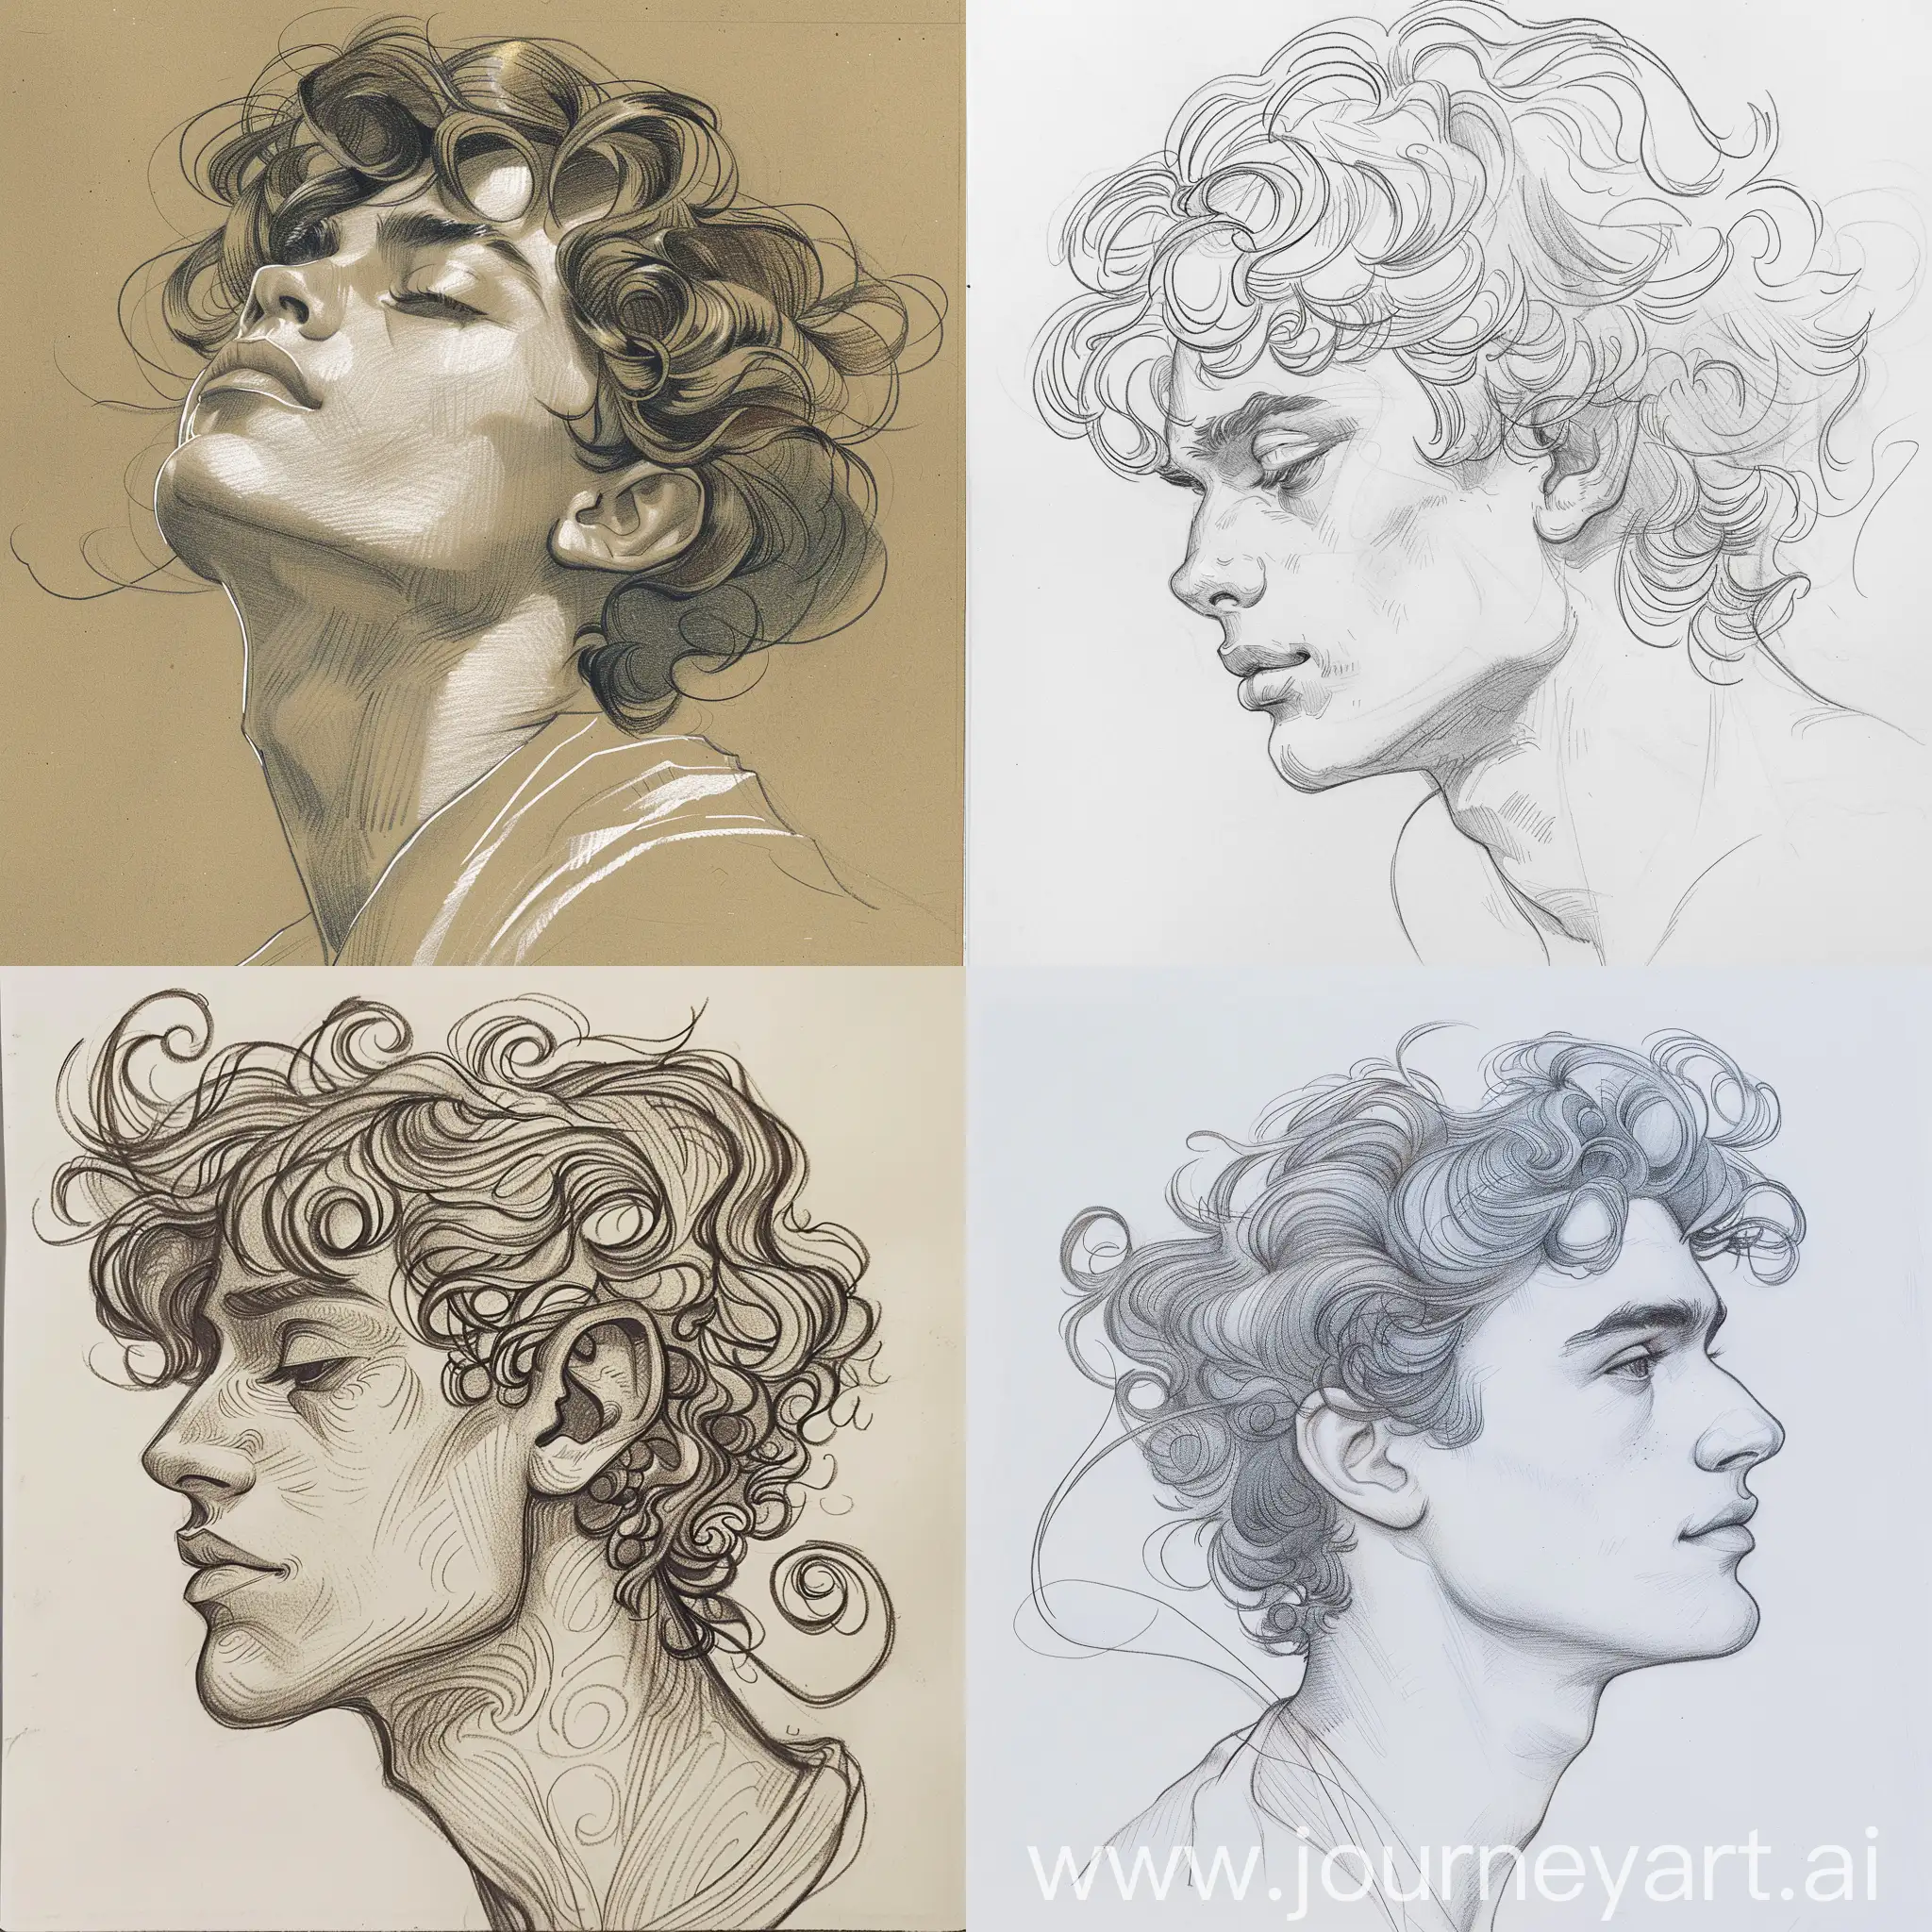 Elegant-Man-with-Flowing-Curls-Art-Nouveau-Portrait-Inspired-by-Alfons-Mucha